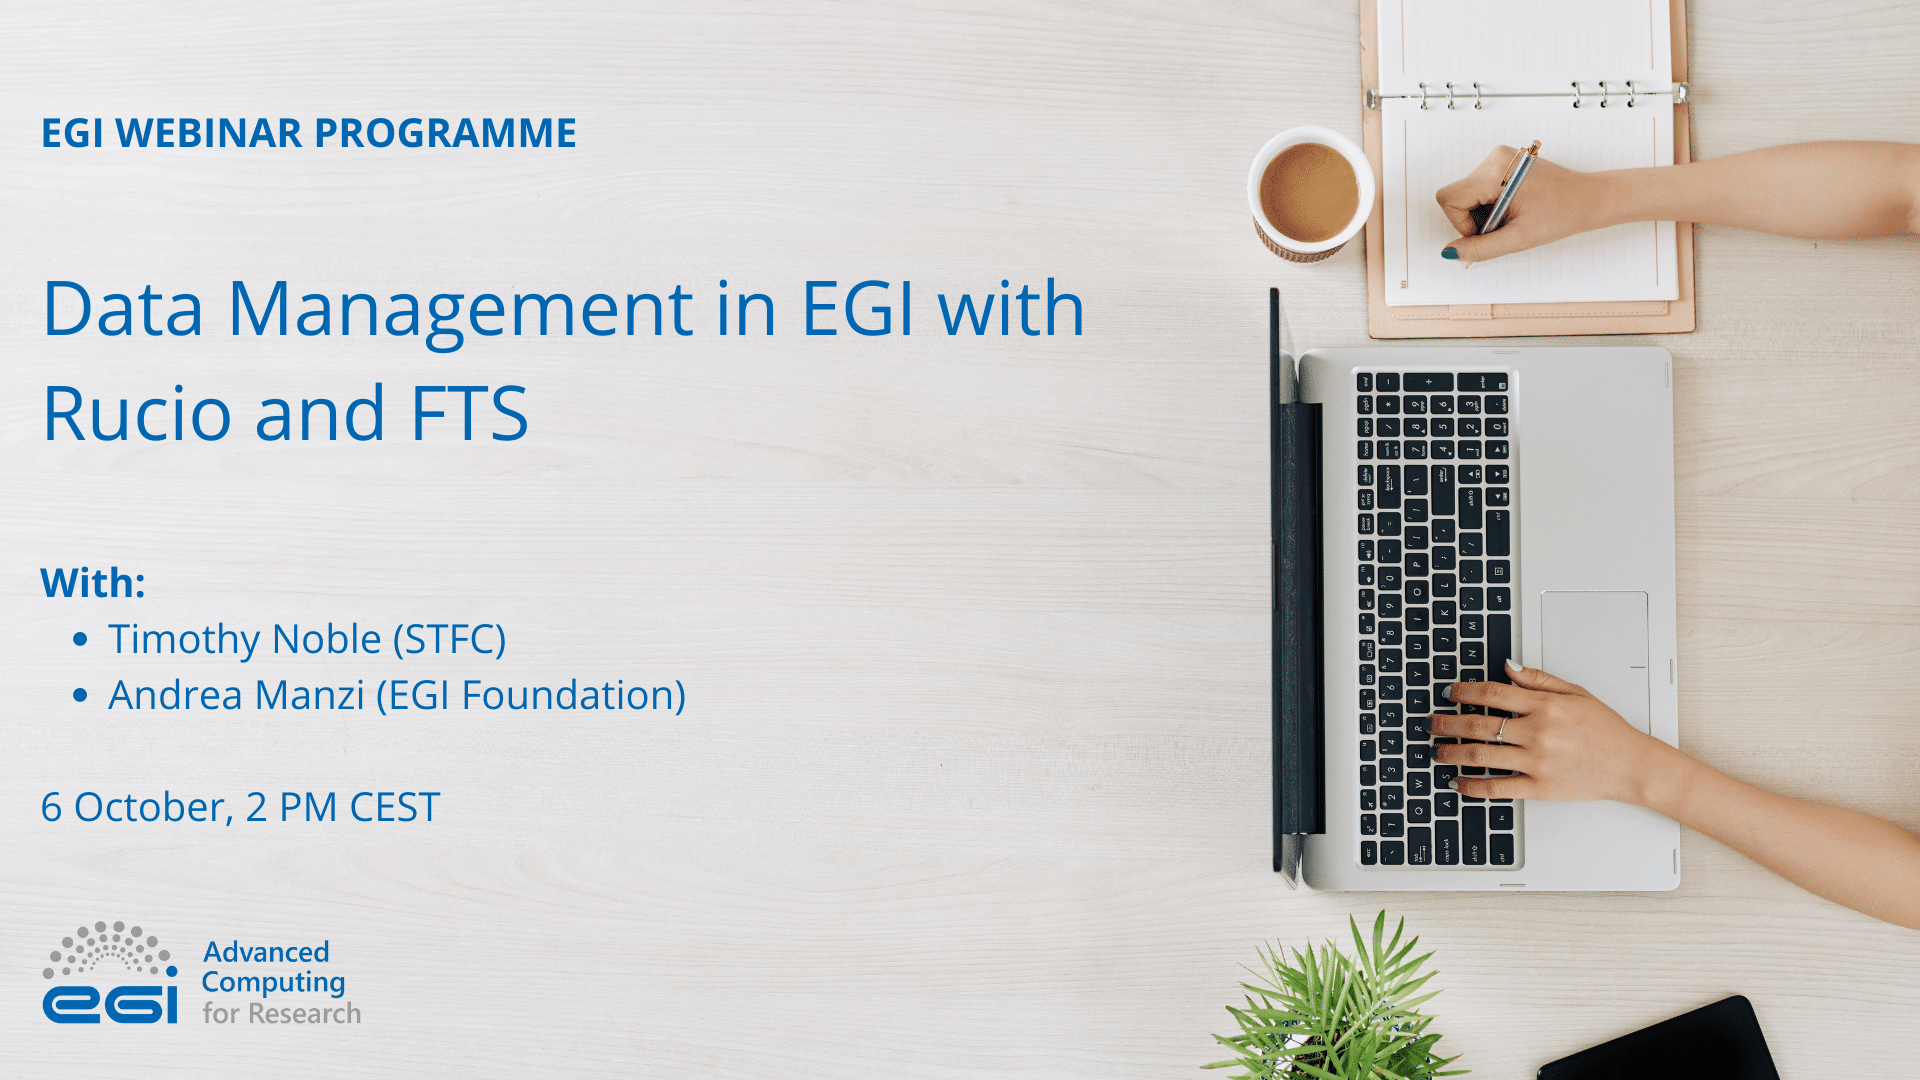 Data Management in EGI with Rucio and FTS